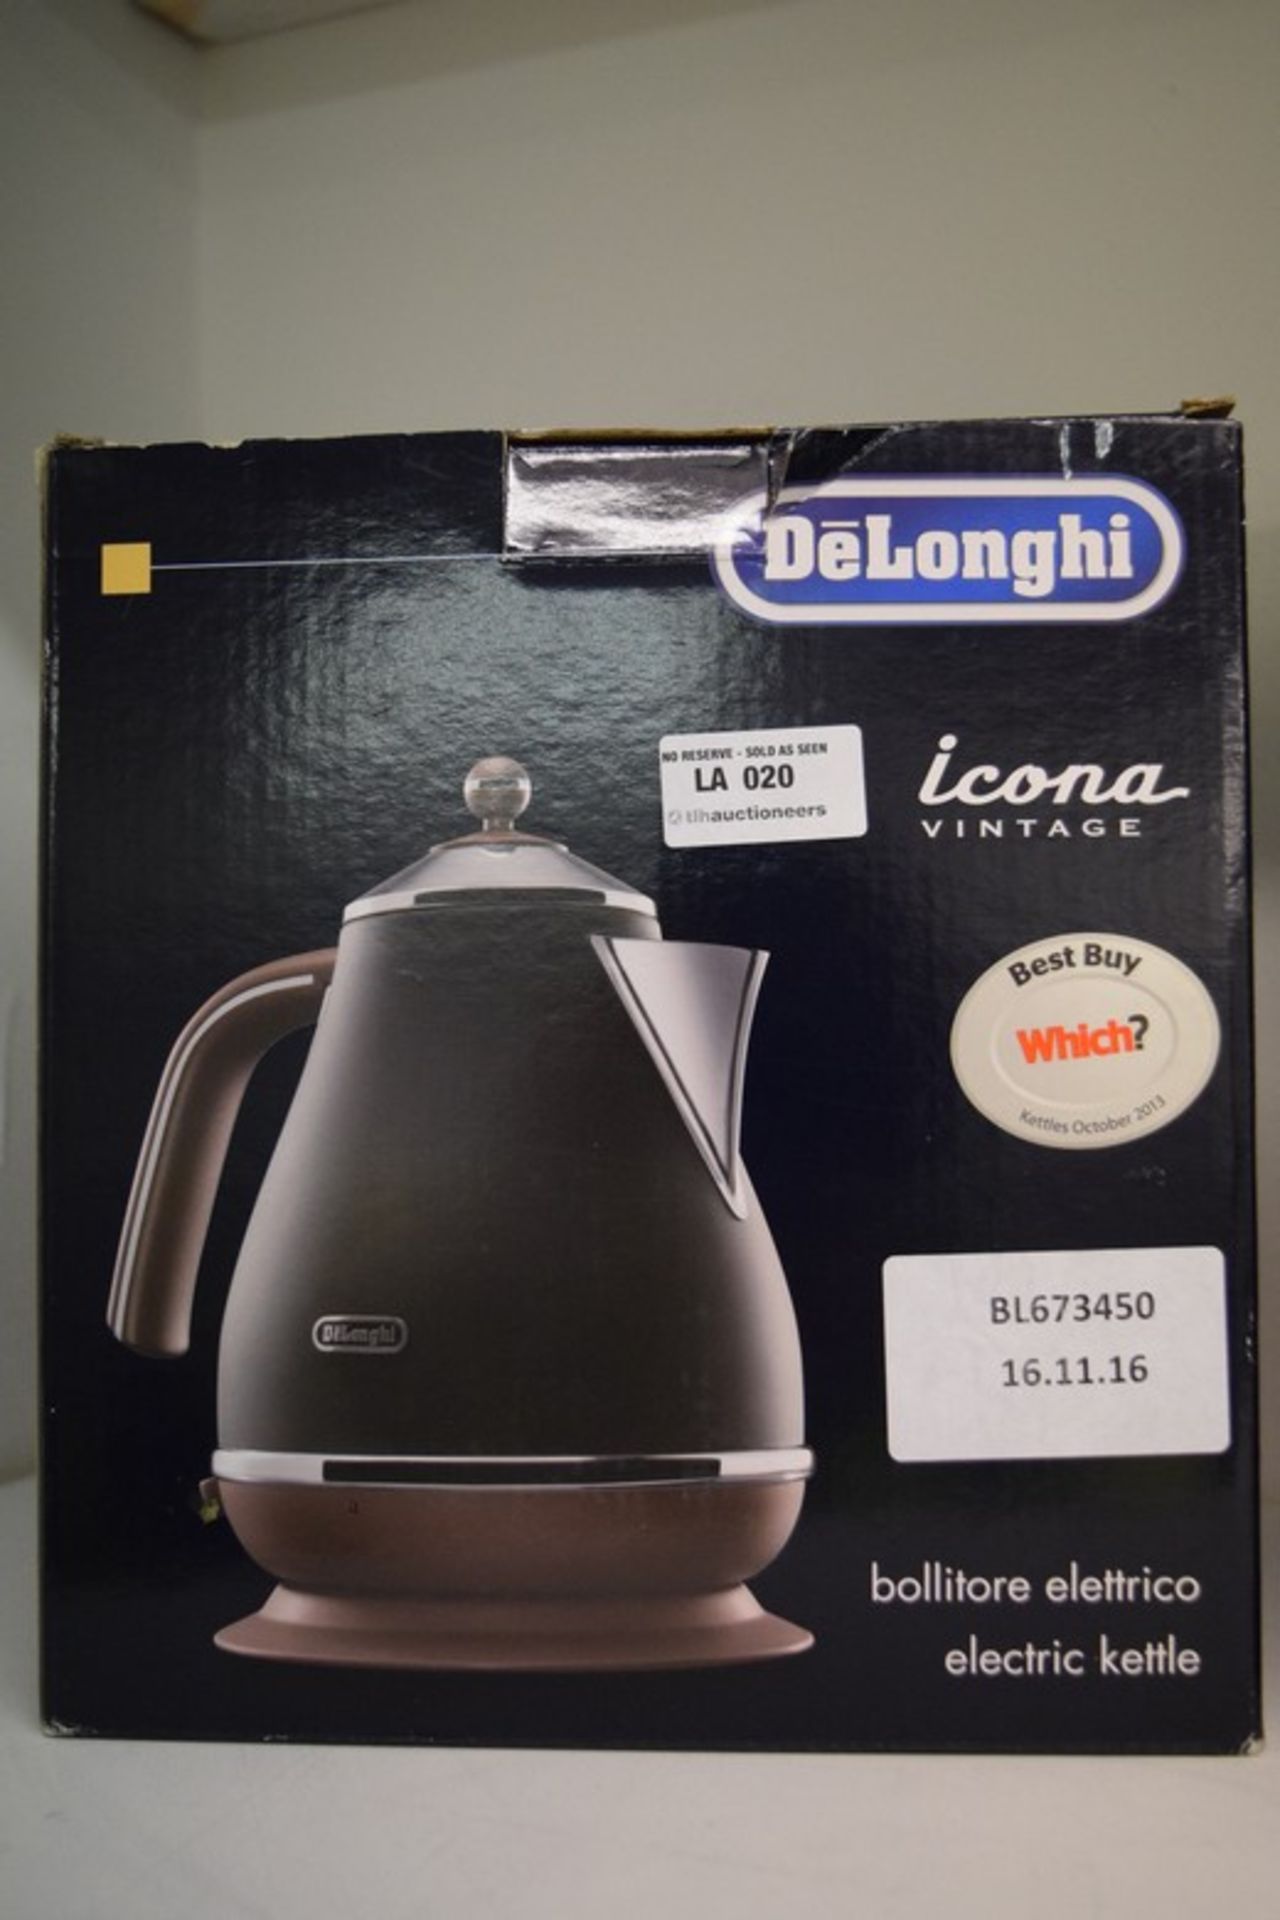 1 x BOXED DELONGHI ICONA VINTAGE KETTLE RRP £60 16/11/16 *PLEASE NOTE THAT THE BID PRICE IS